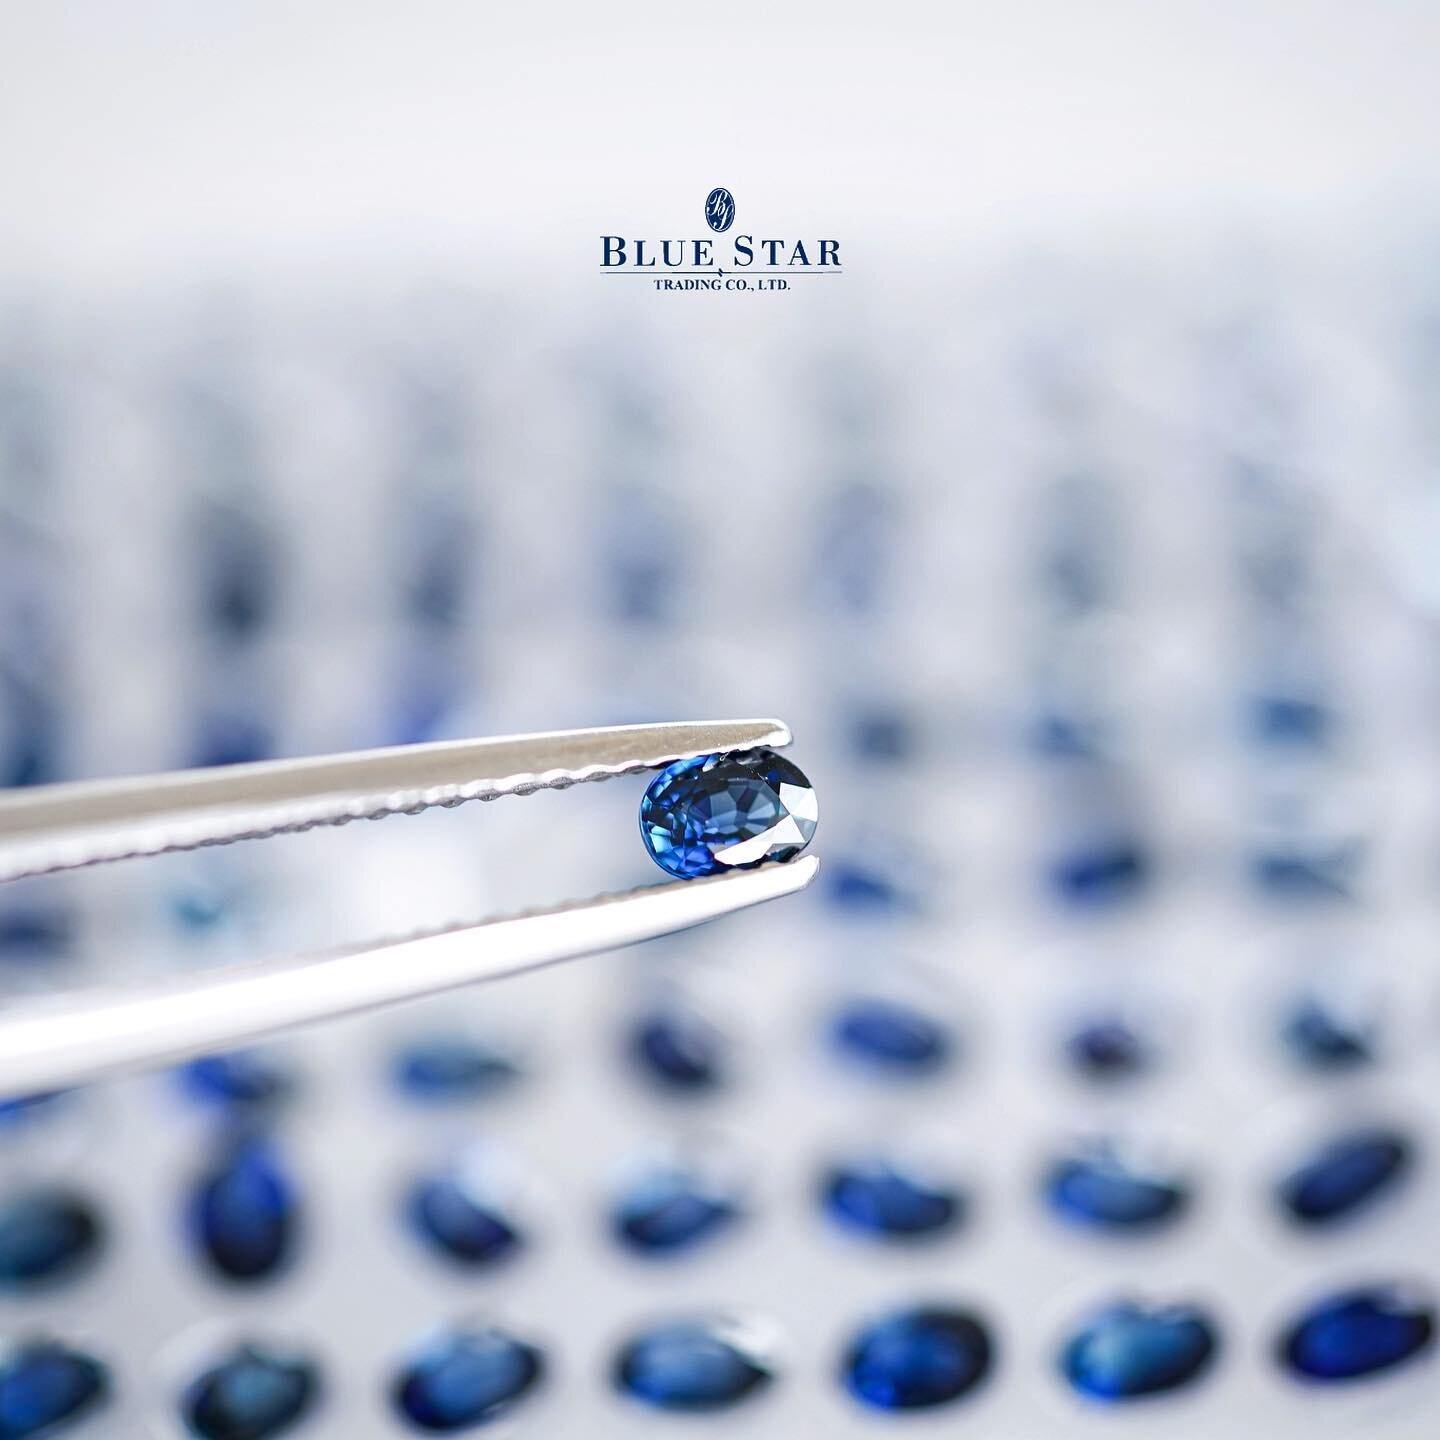 Blue sapphire : a solid connection to wealth and abundance.
&mdash;&mdash;&mdash;&mdash;&mdash;&mdash;&mdash;&mdash;&mdash;&mdash;&mdash;&mdash;
Ovals 4x3mm B8 loupe clean 
Heat treated. 
AV : 0.22ct 

_______________________________________
Blue Sta